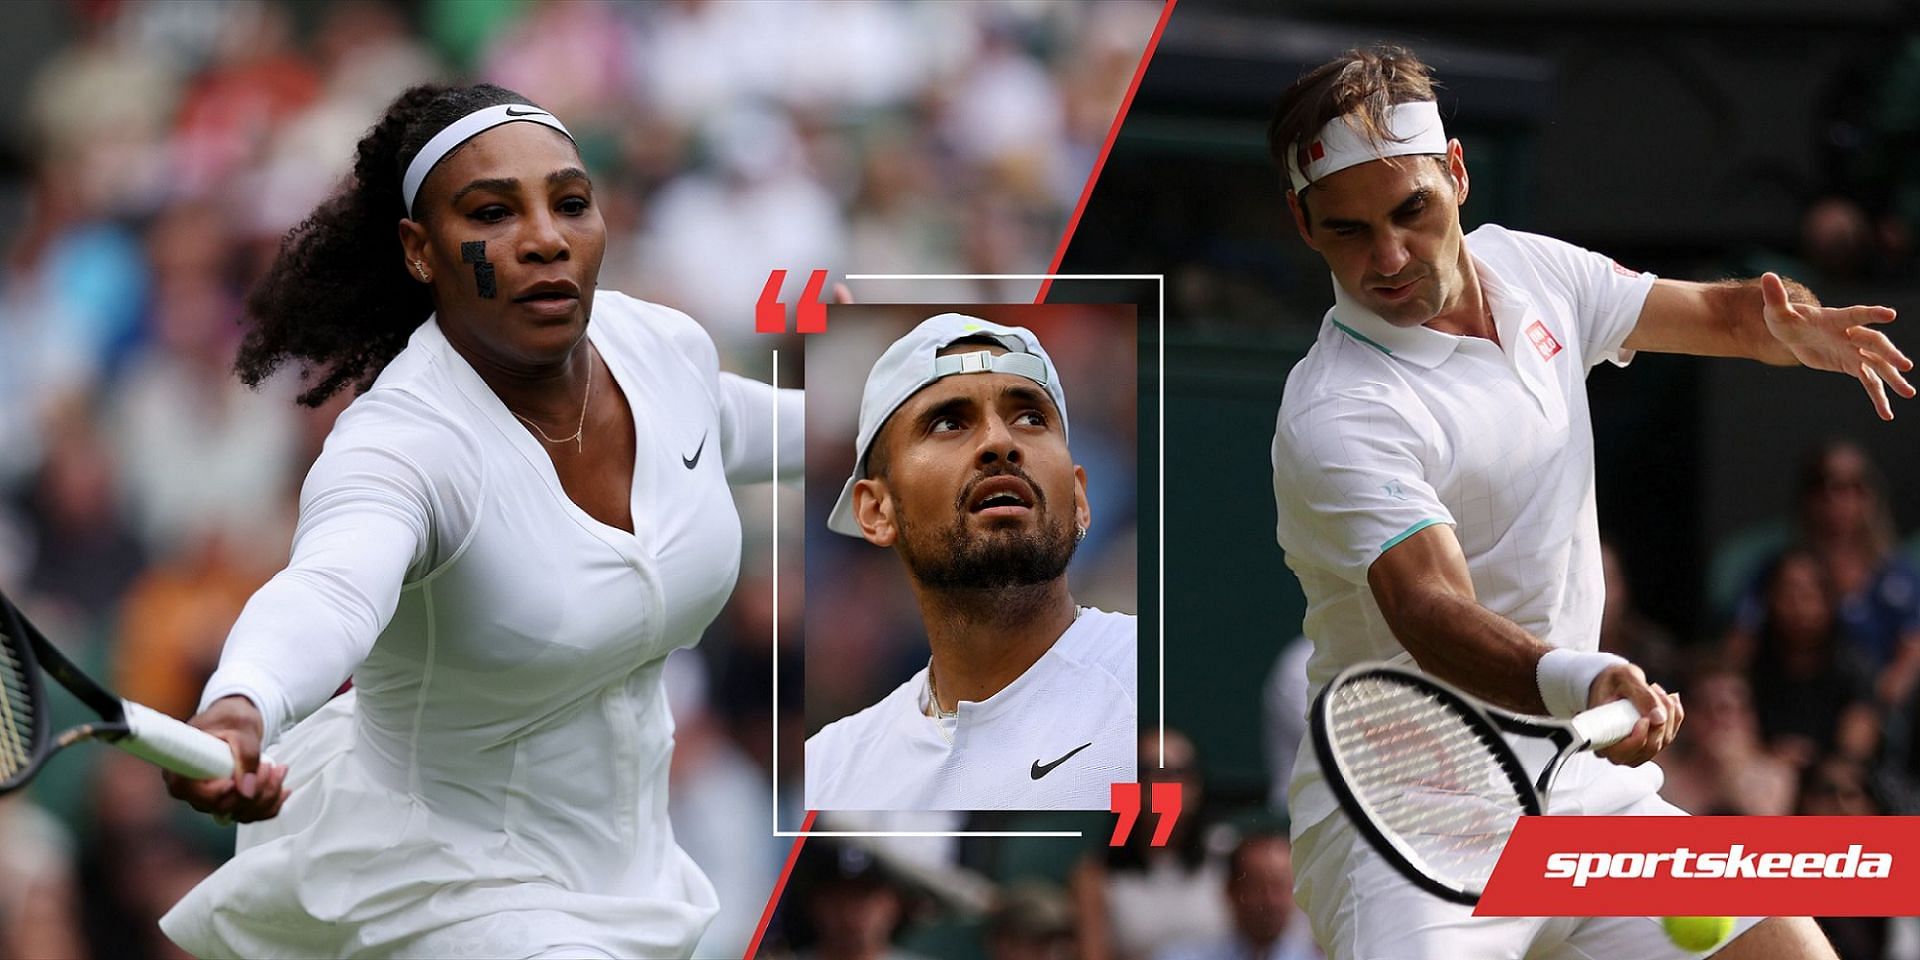 Nick Kyrgios believes that his opponents are scared to face him, similar to Serena Williams or Roger Federer